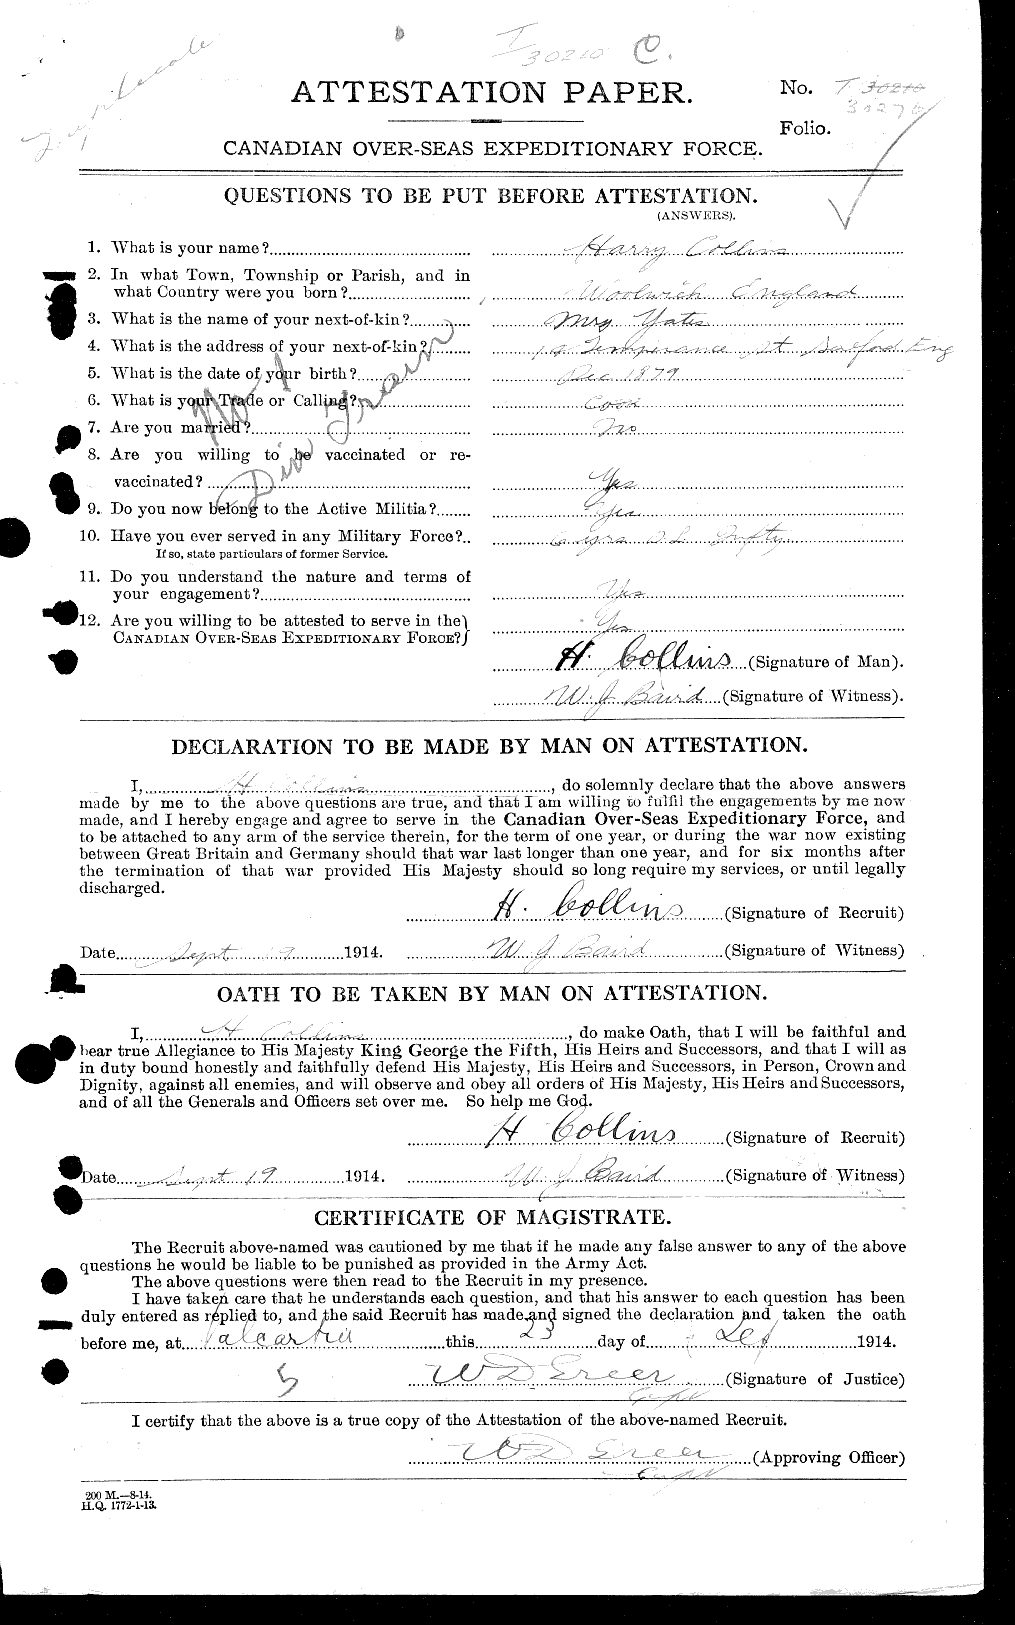 Personnel Records of the First World War - CEF 042290a